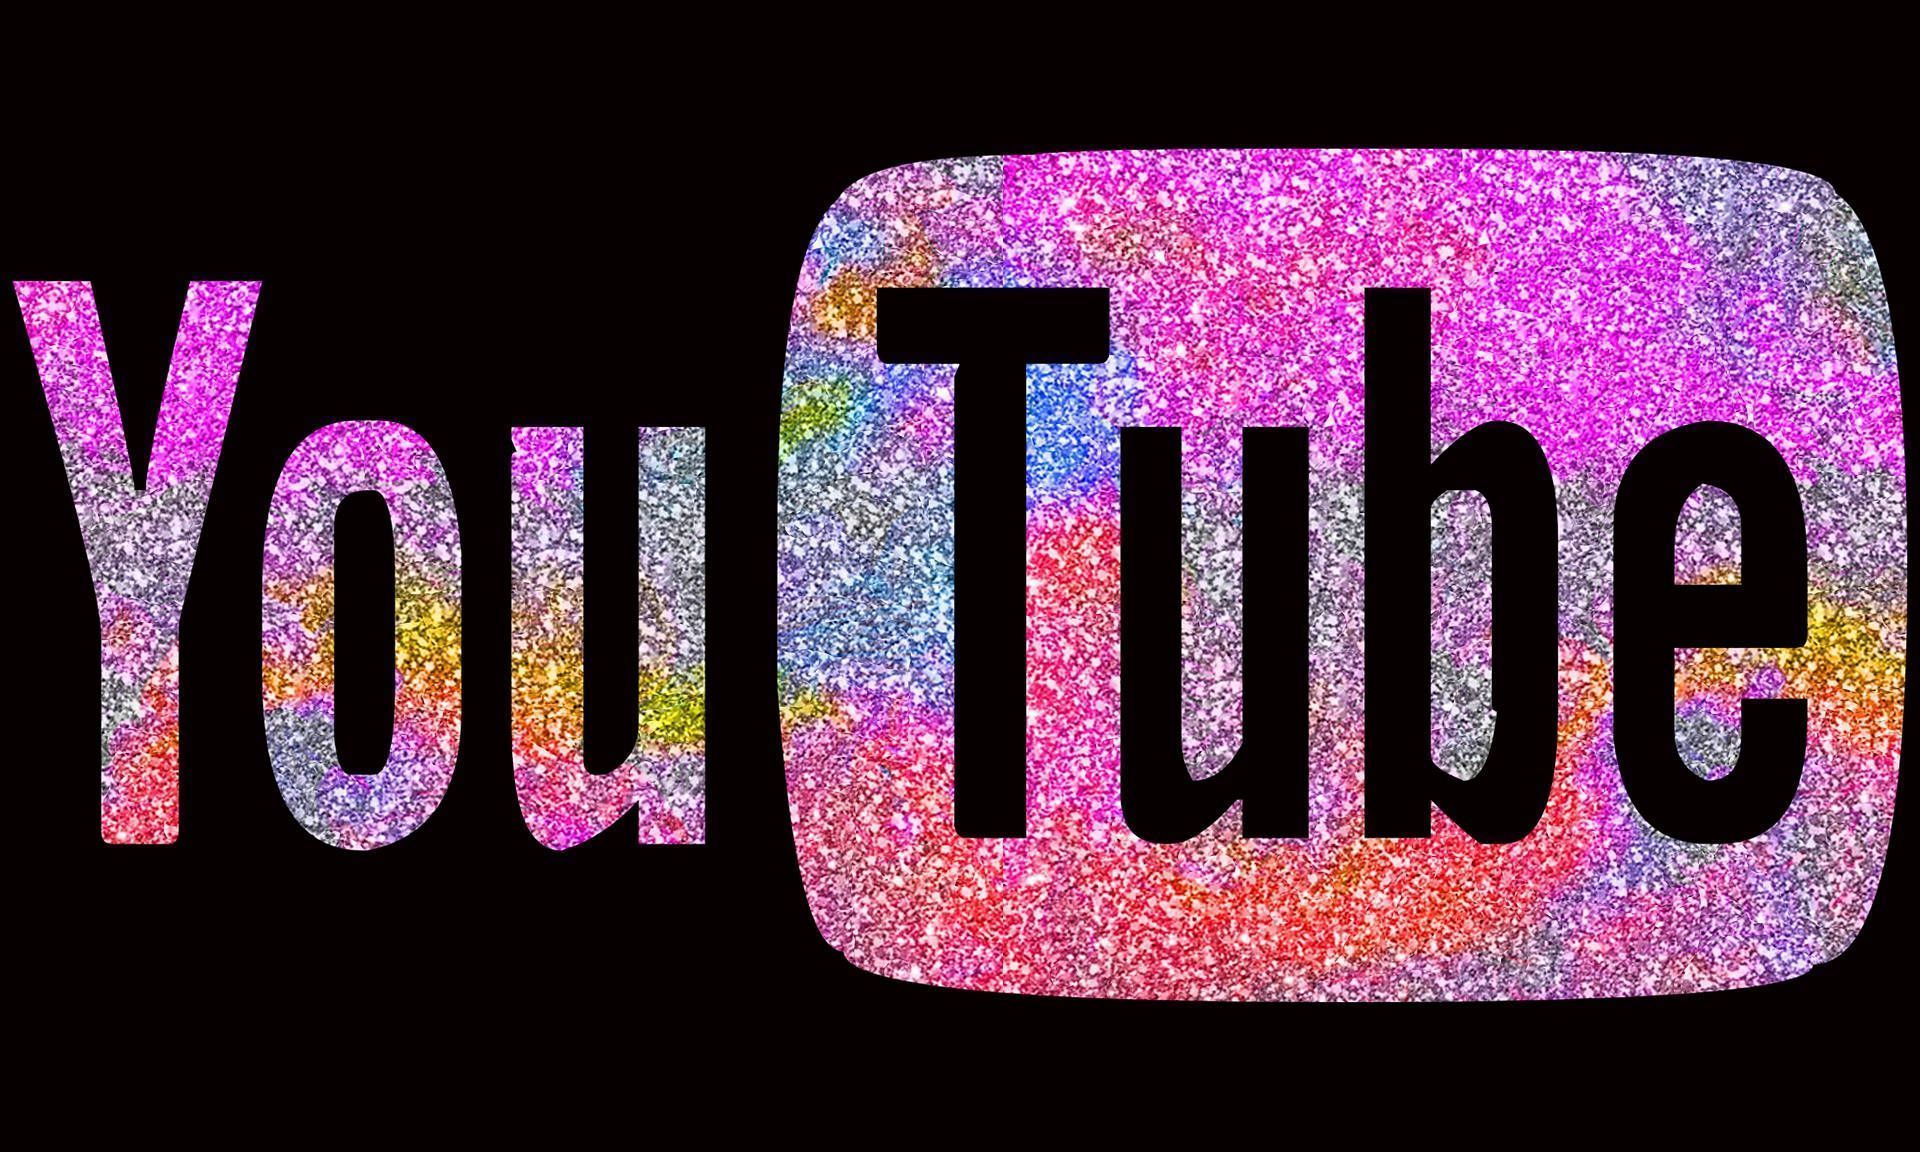 The youtube logo with glitter and color - YouTube